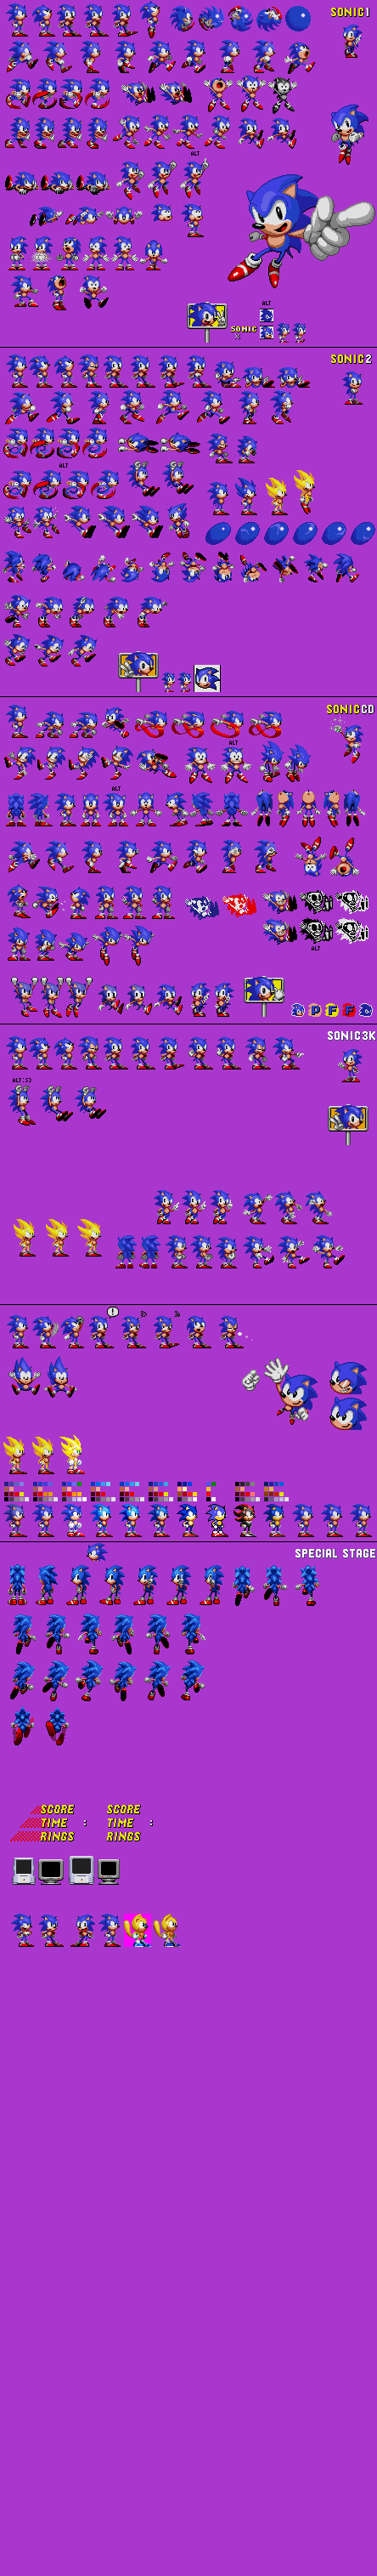 This Custom/Edited Classic Sonic sprite I made is a combination of -  Sonic.EXE : Project Parasite by MiIes